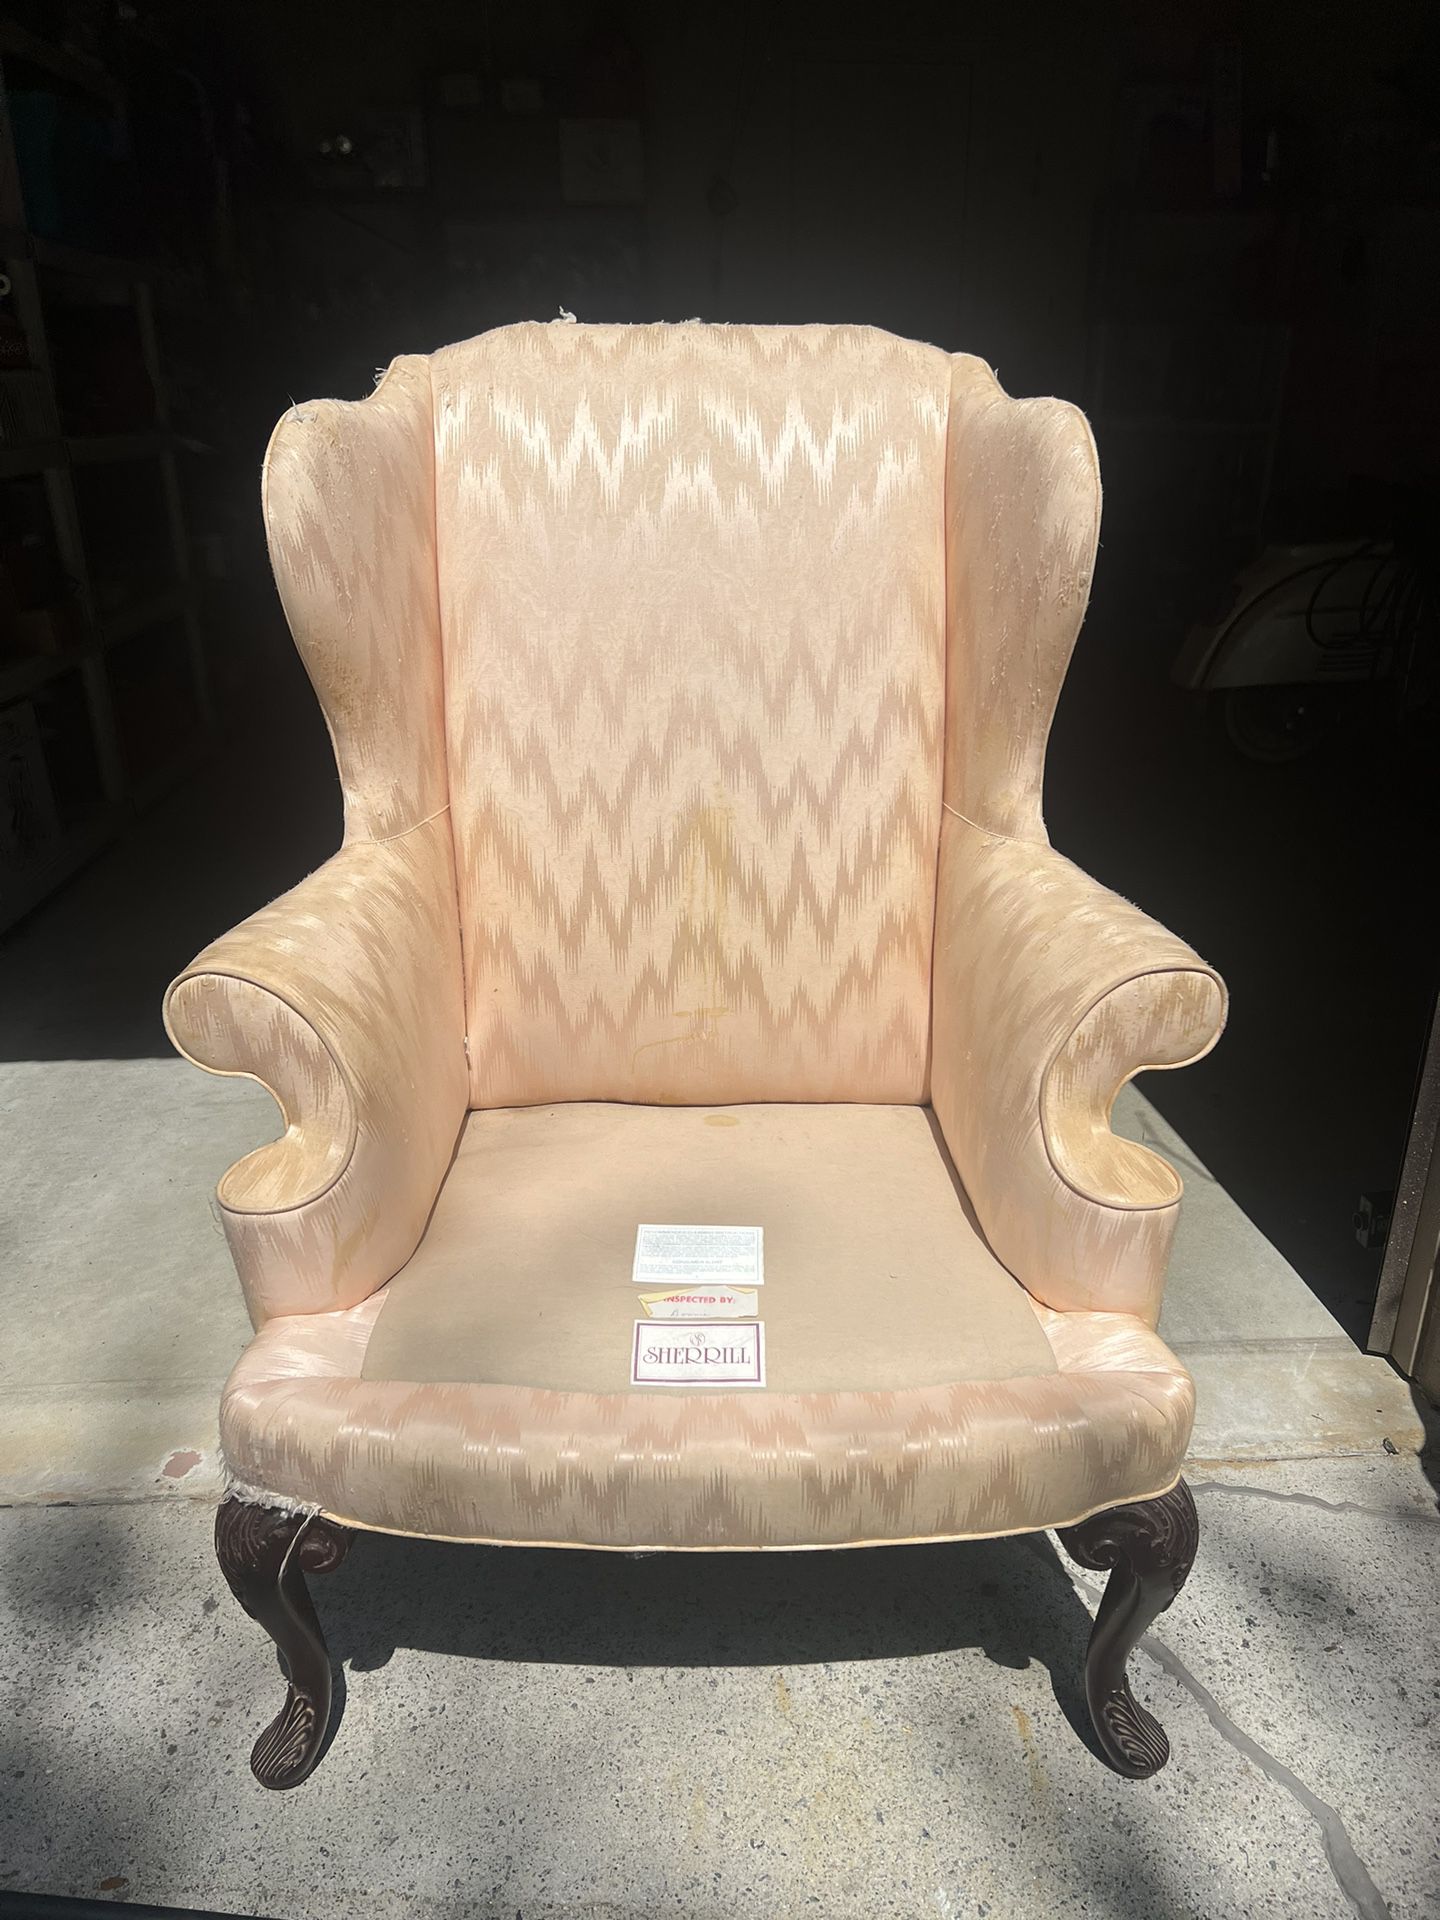 SHERRILL Wingback chair - Needs New Upholstery